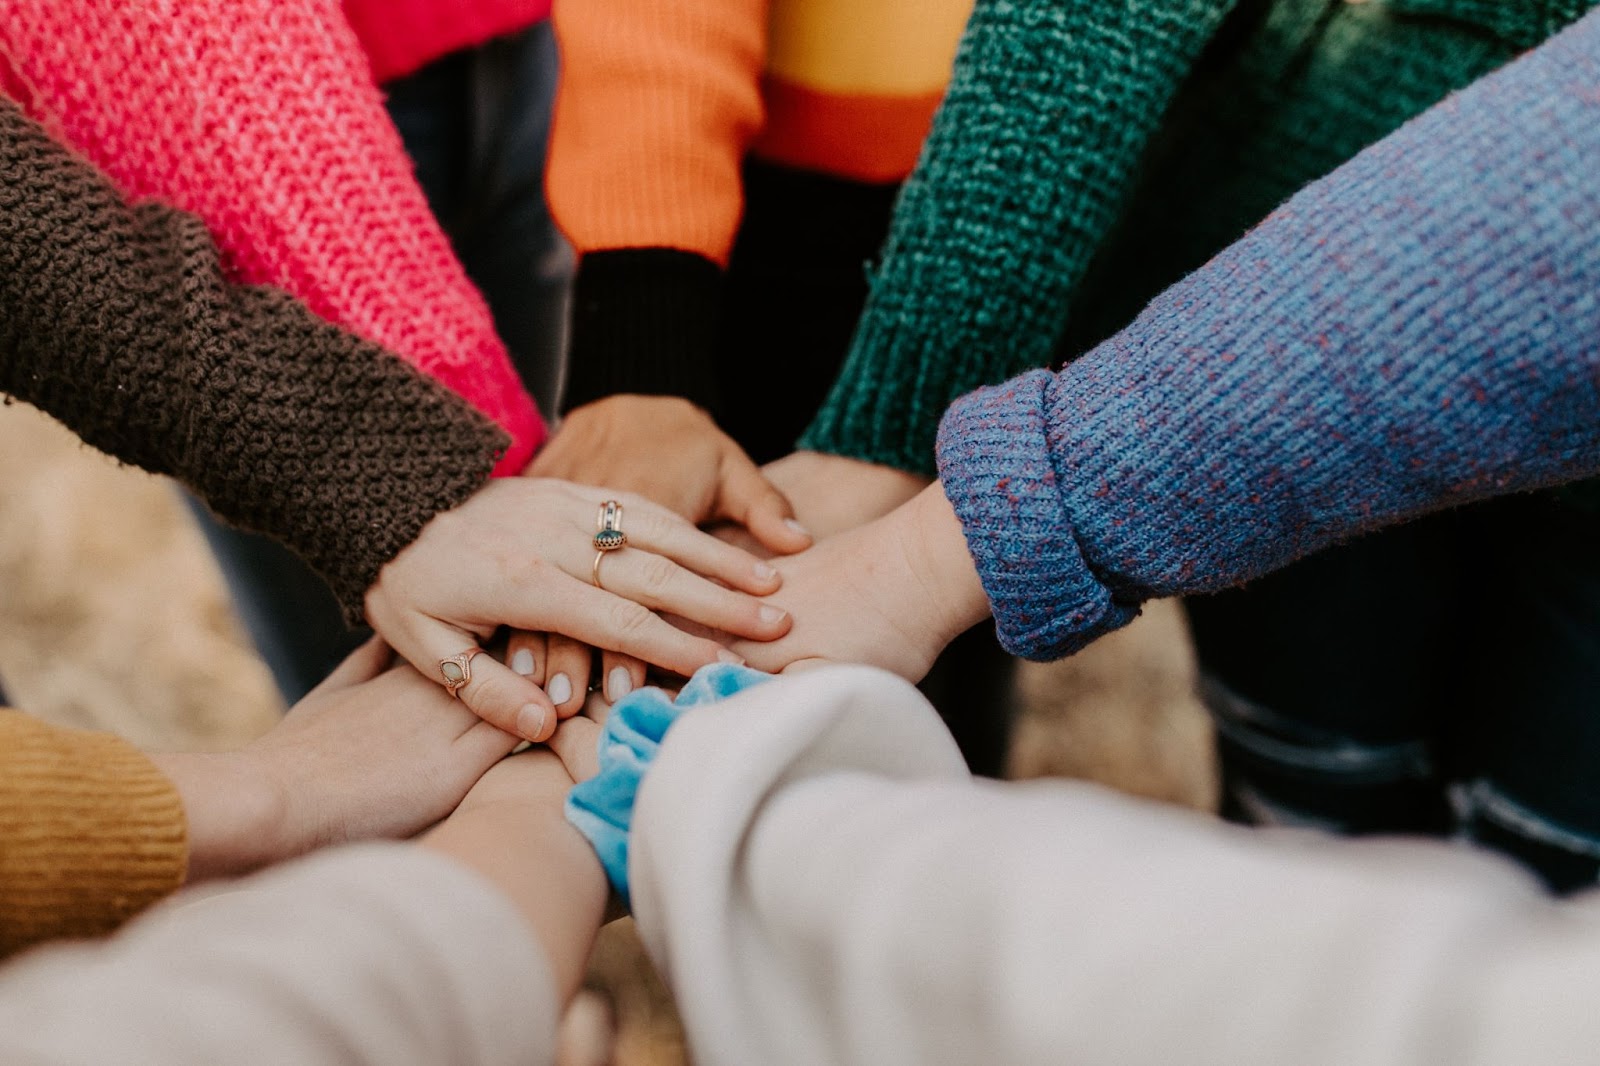 An authentic brand results in a unified message. This photo shows a group of people with their hands in the center of a circle.